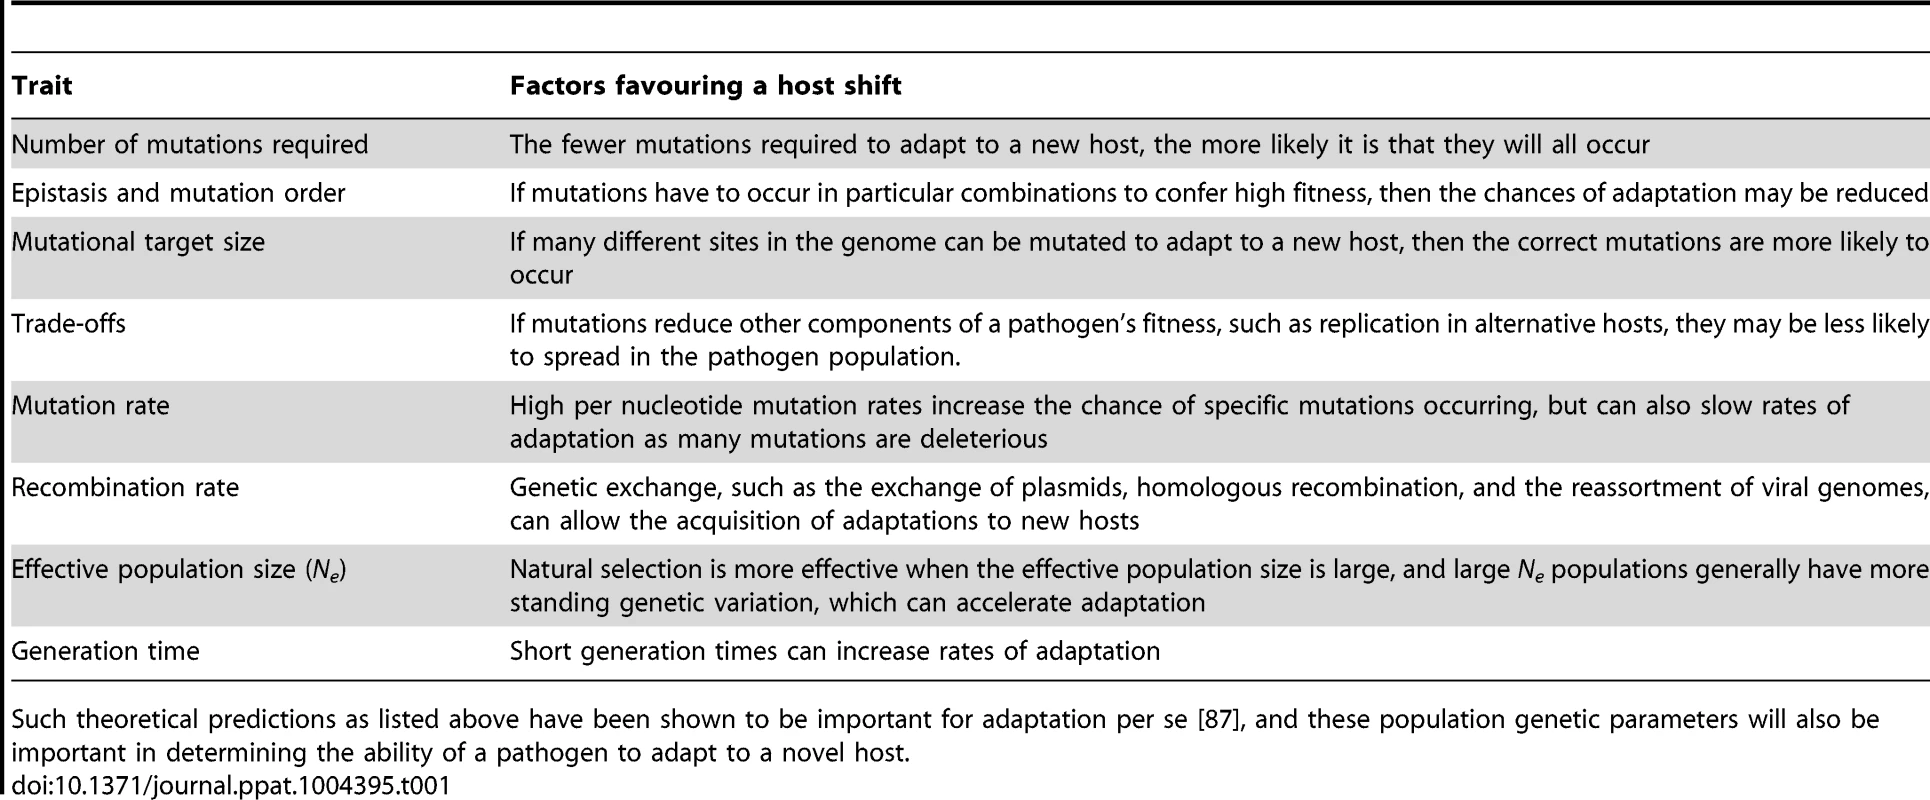 Factors that evolutionary theory predicts will affect the likelihood that the correct set of mutations will arise to adapt a pathogen to a new host.